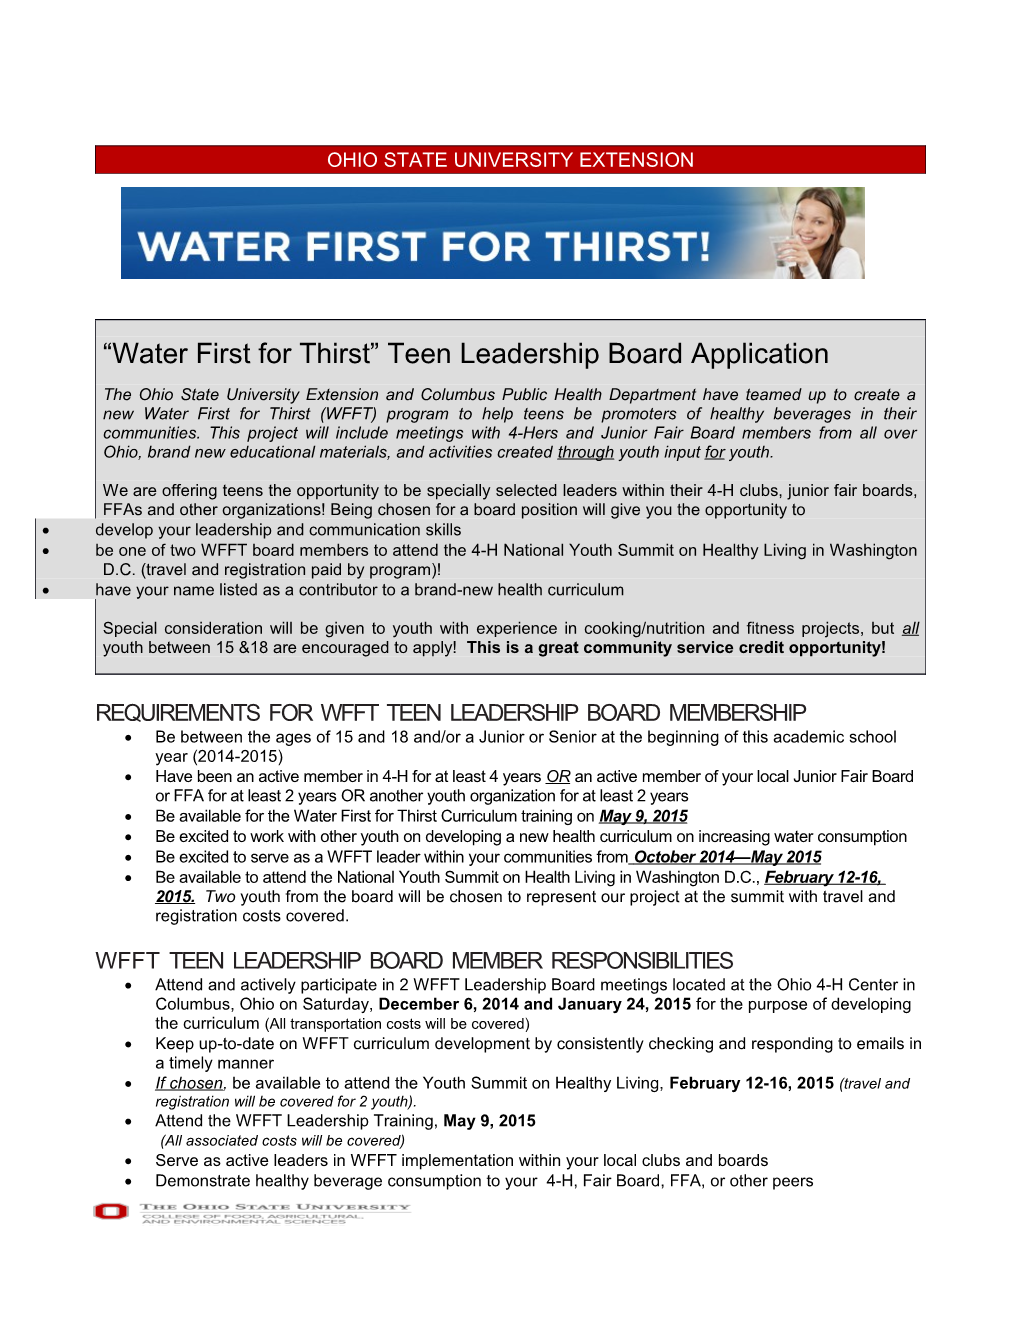 Water First for Thirst Teen Leadership Board Application